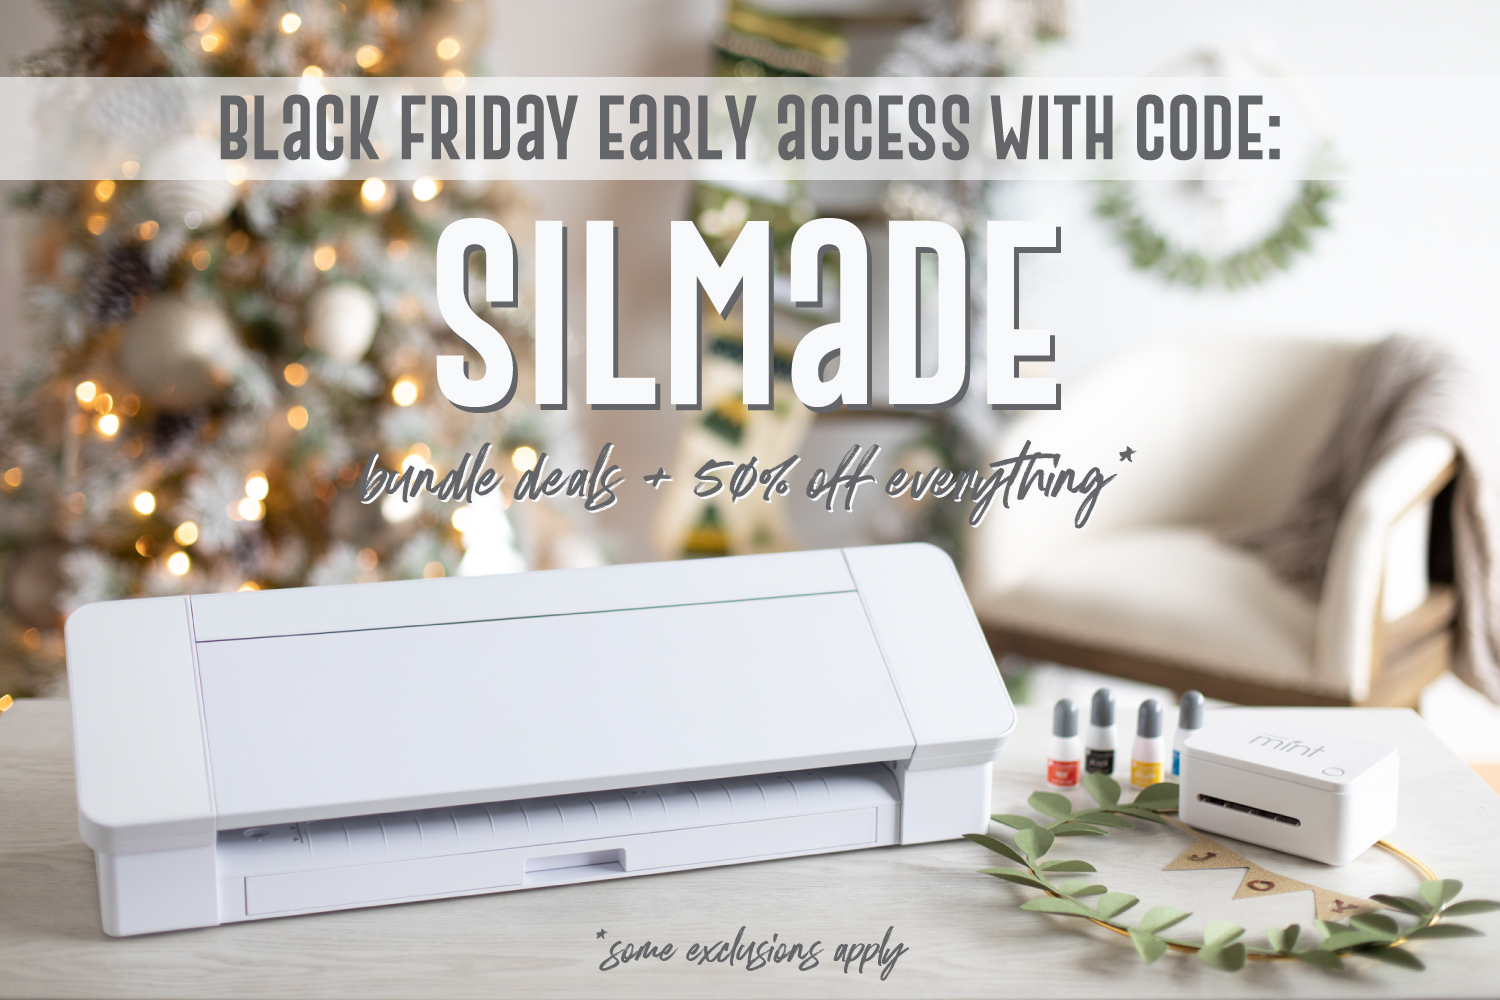 Silhouette Black Friday deals: Up to 25% off Silhouette Portrait 3 and Cameo  4